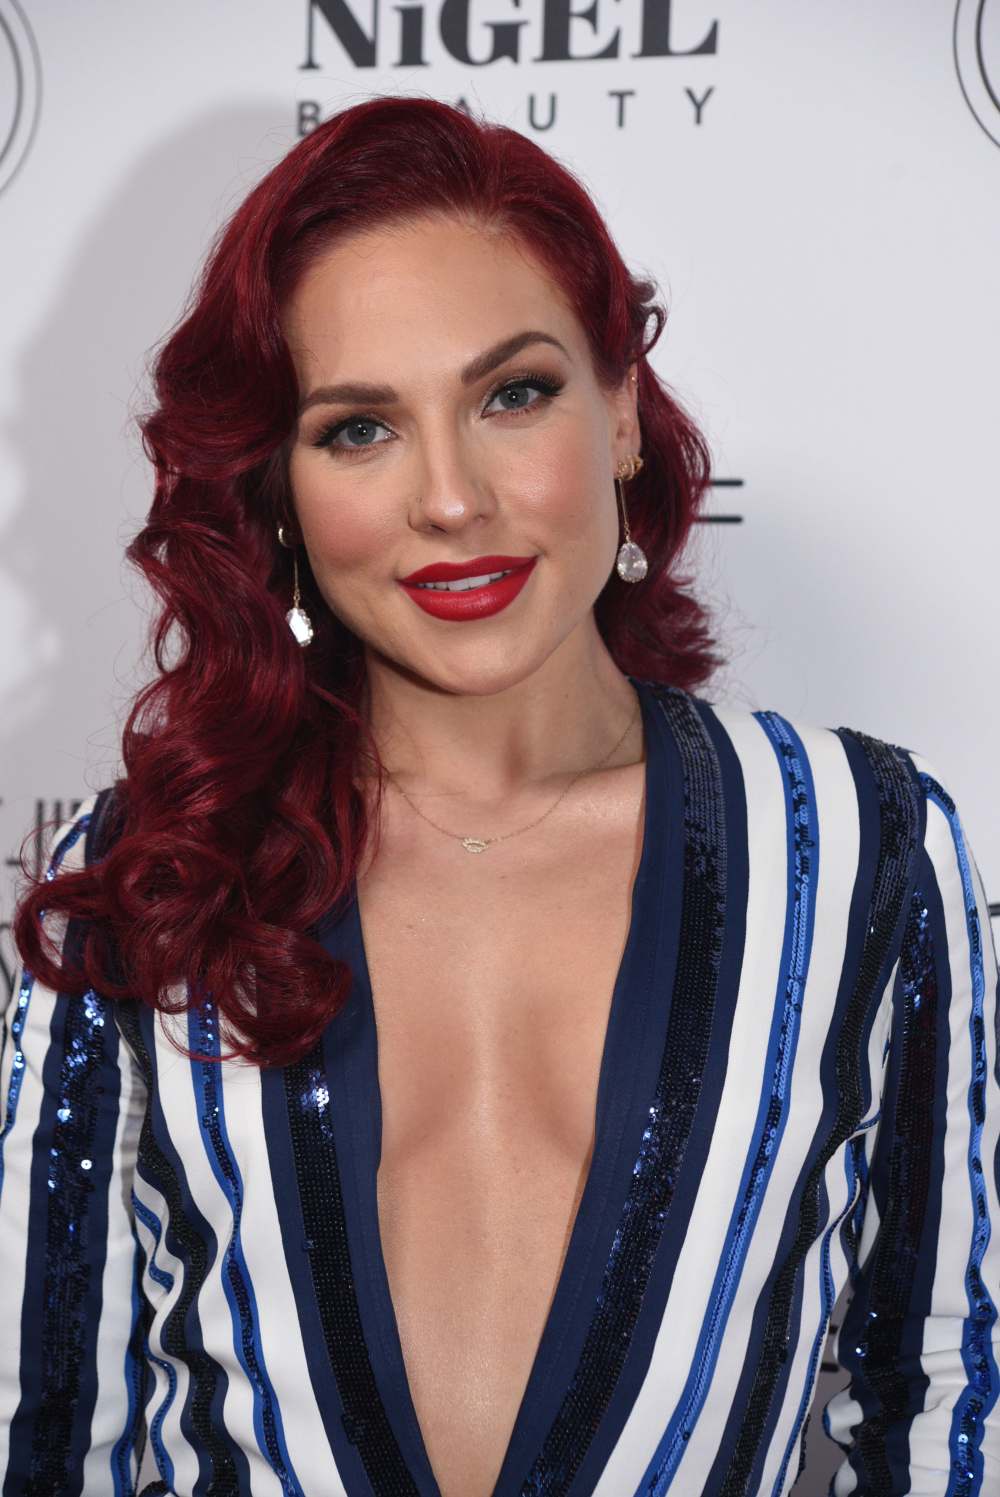 Sharna Burgess Reveals She’s ‘Off the Market,’ Teases New Relationship